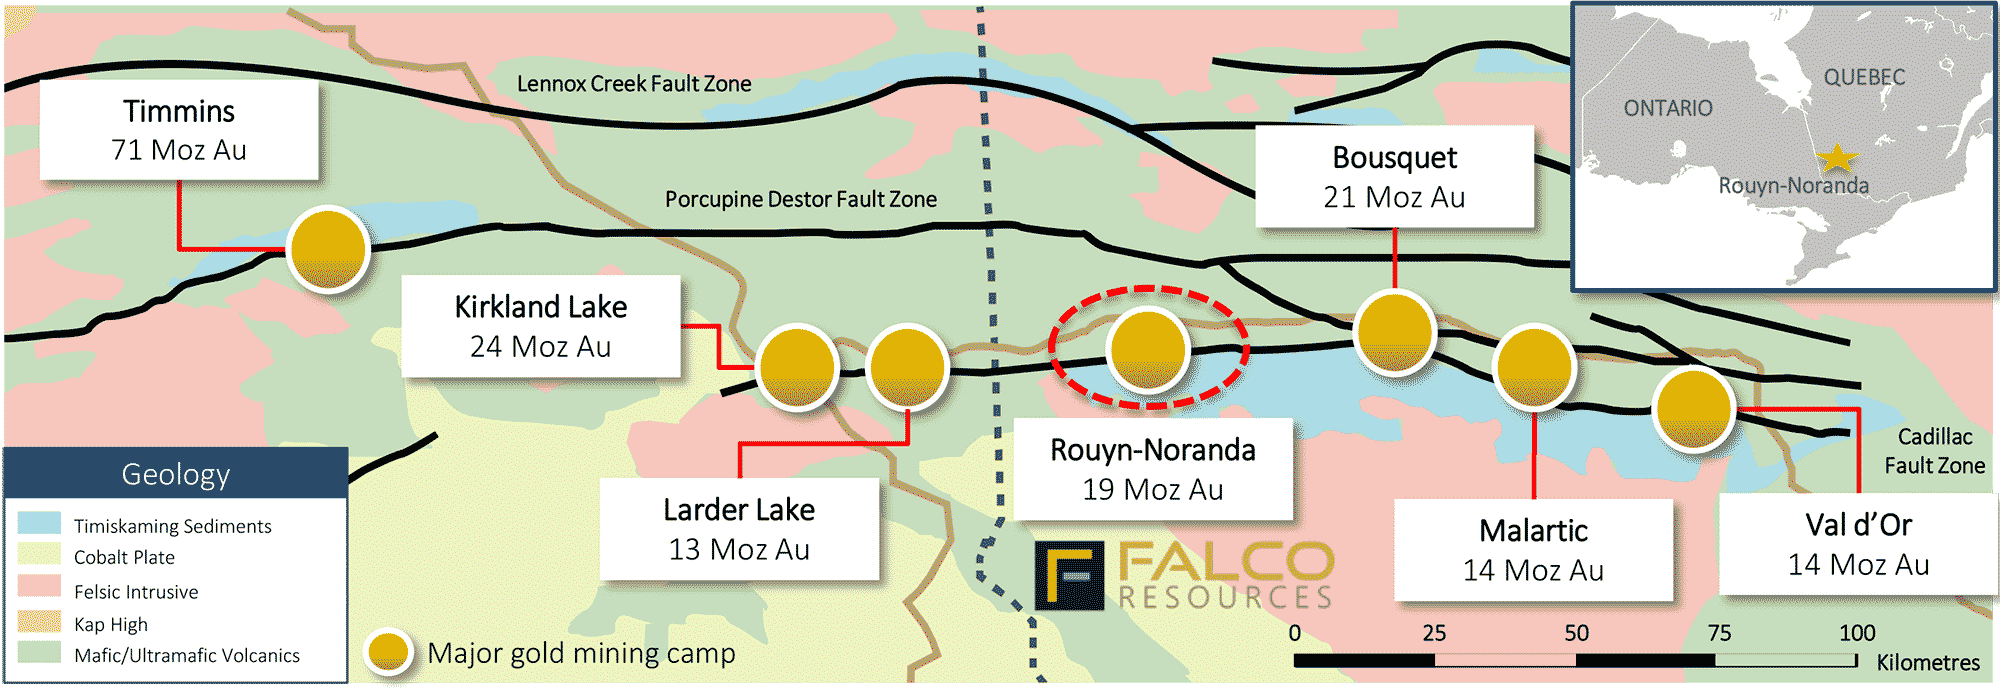 Southern Abitibi Greenstone Belt - 50 current and former gold and base metal mines in the Rouyn-Noranda camp. Rouyn-Noranda camp has produced 19 Moz of gold and 2.9 Blbs of copper, but underexplored for gold